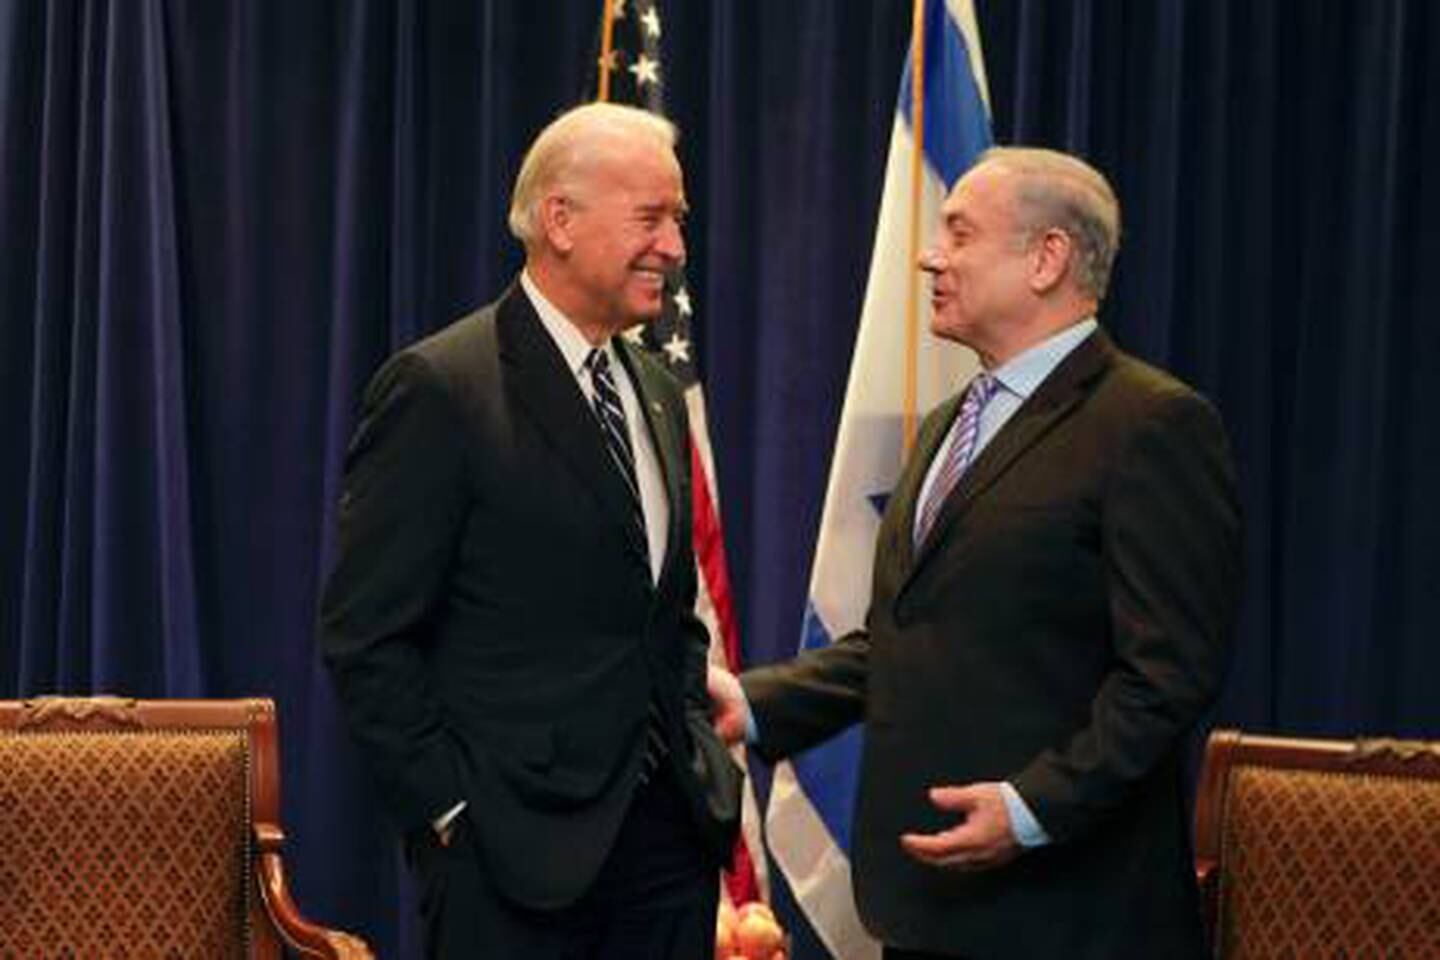 U.S. Vice President Joe Biden (L) speaks with Israel's Prime Minister Benjamin Netanyahu during a meeting on Middle East security in New Orleans, Louisiana November 7, 2010. Netanyahu will tell Biden on Sunday that only a credible military threat can deter Iran from building a nuclear weapon, Israeli political sources said. REUTERS/Lee Celano (UNITED STATES - Tags: POLITICS) *** Local Caption ***  NOR101_USA-ISRAEL-_1107_11.JPG